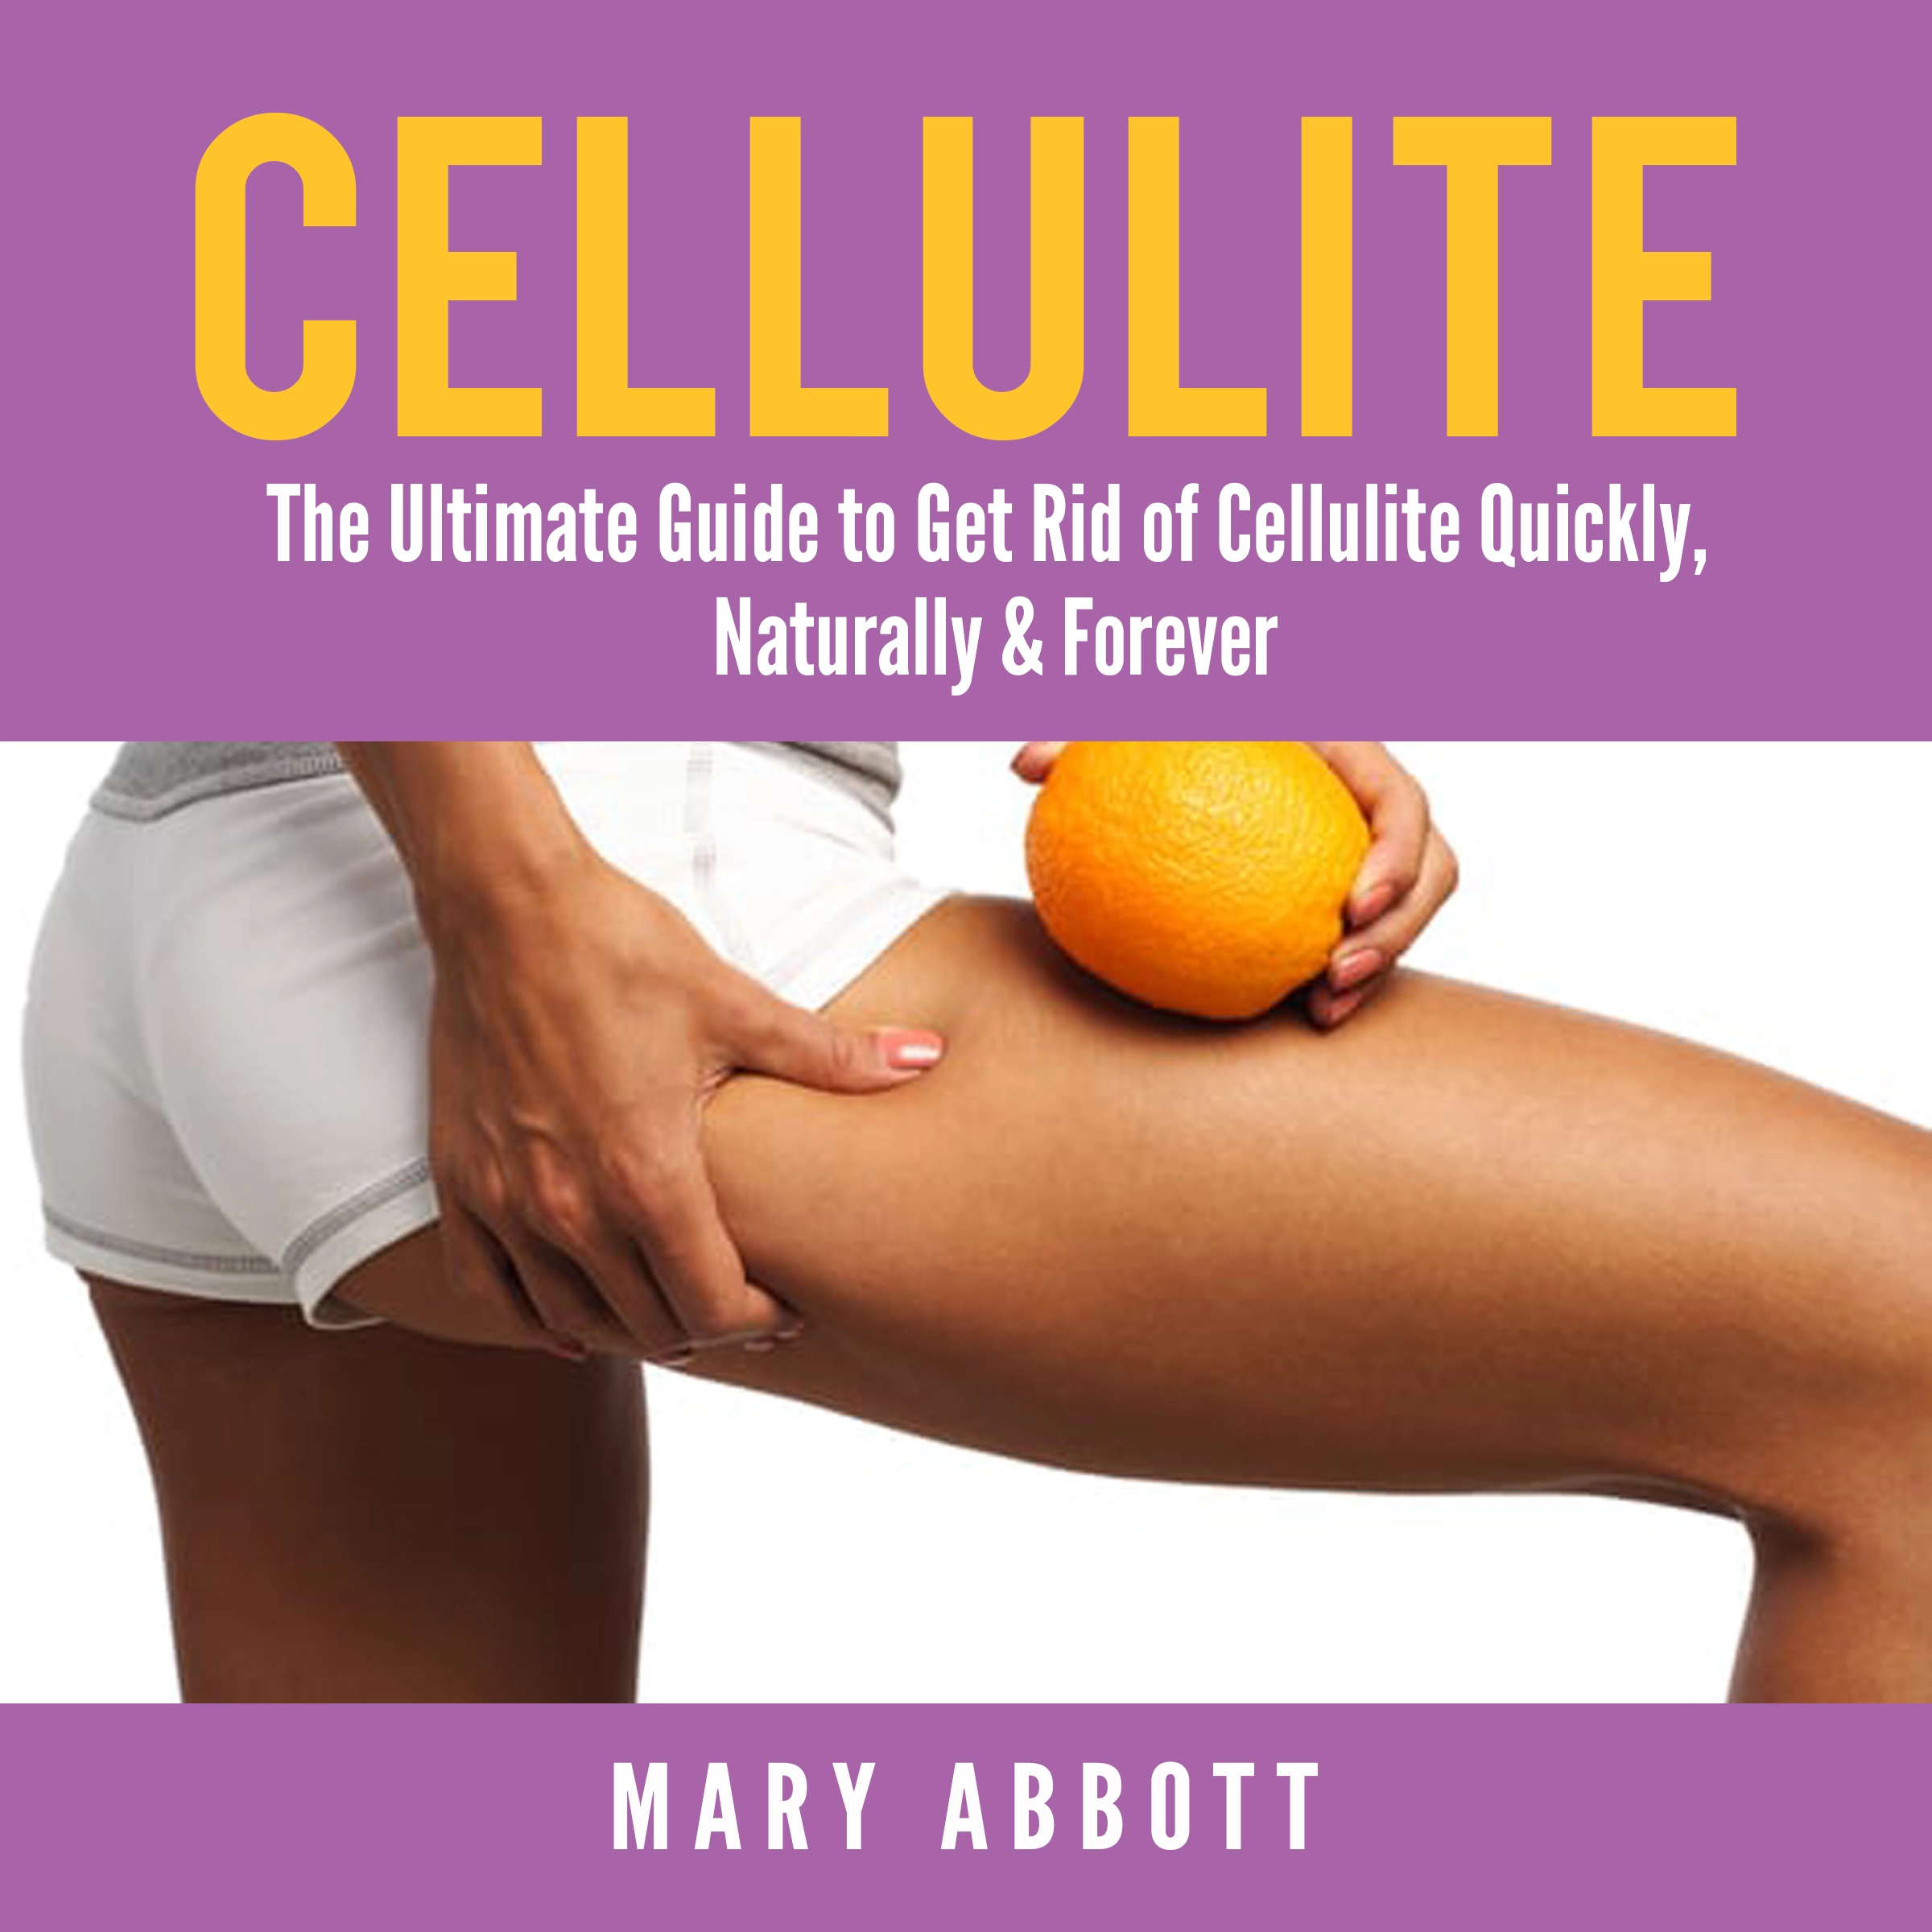 Cellulite: The Ultimate Guide to Get Rid of Cellulite Quickly, Naturally & Forever Audiobook by Mary Abbott